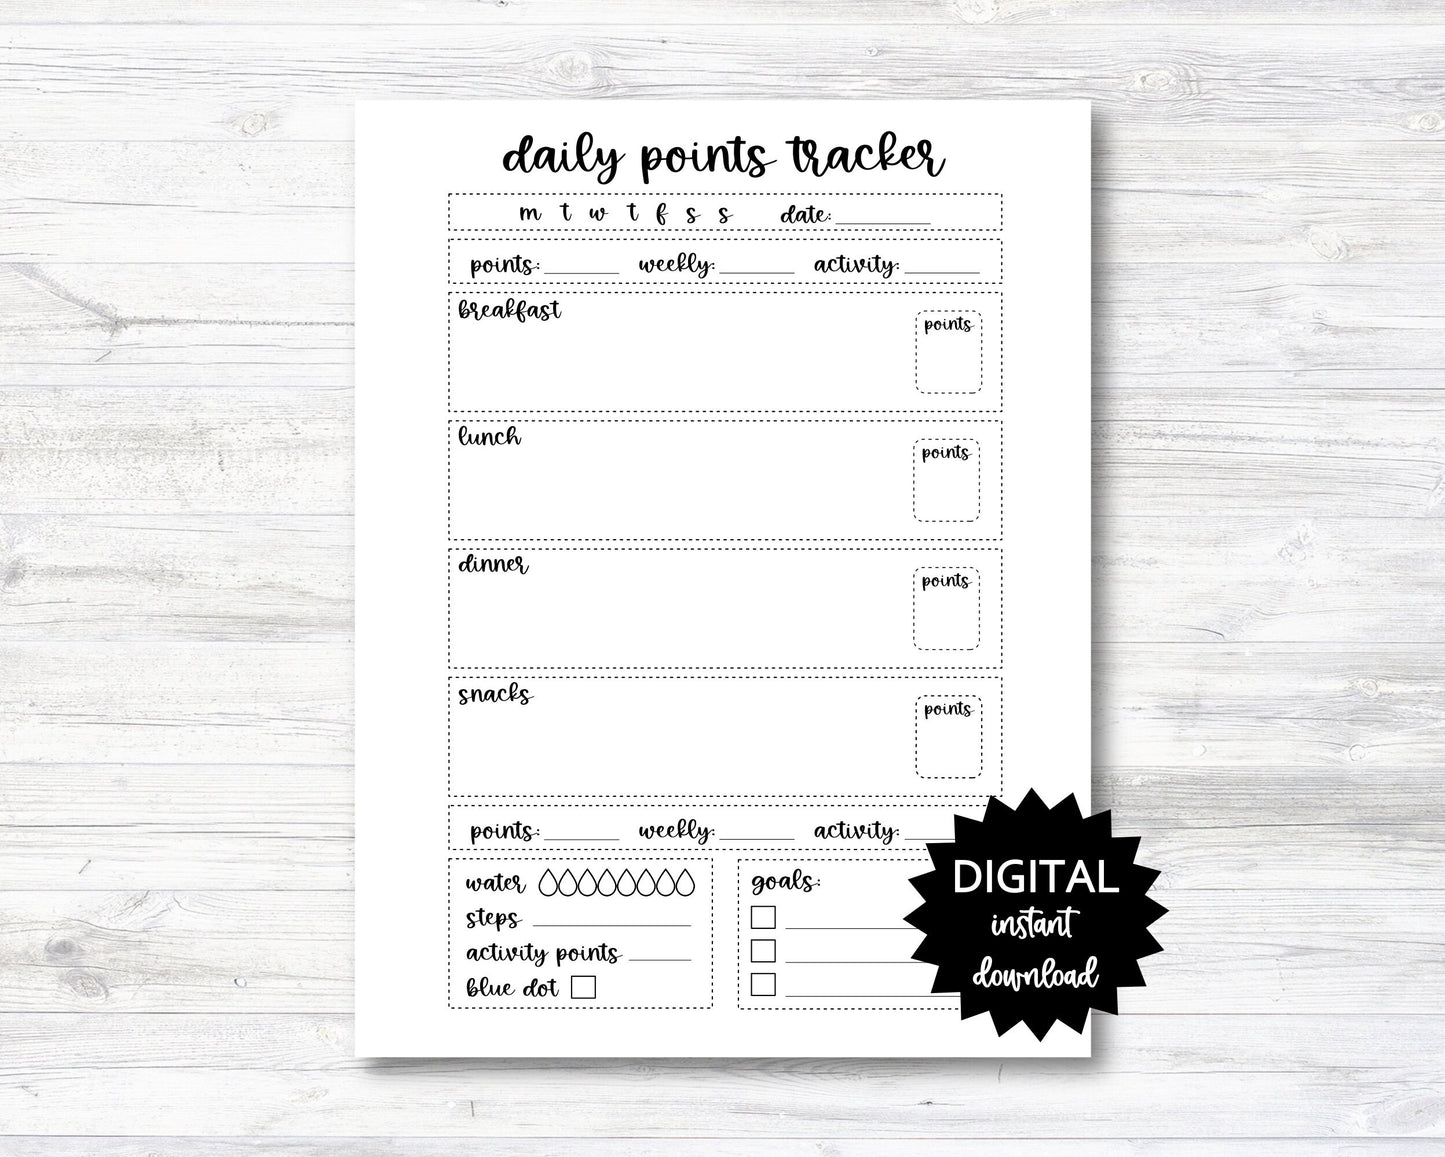 Daily Points Tracking Printable, Point Tracker Planner Page - PRINTABLE (N004)